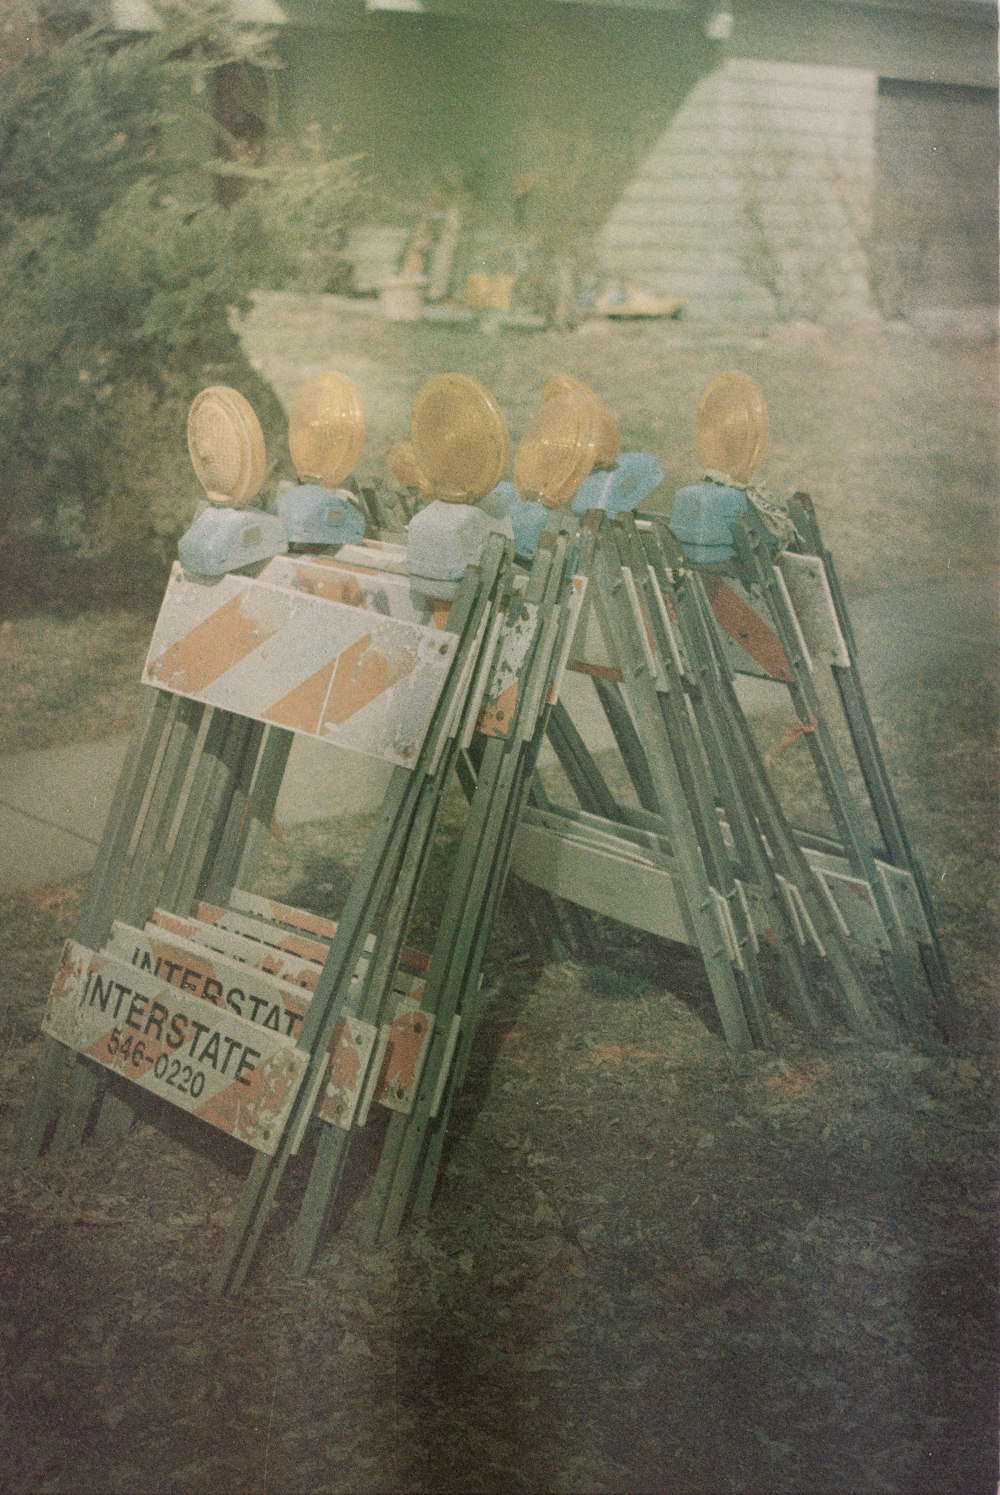 a pile of signs sitting on top of a grass covered field